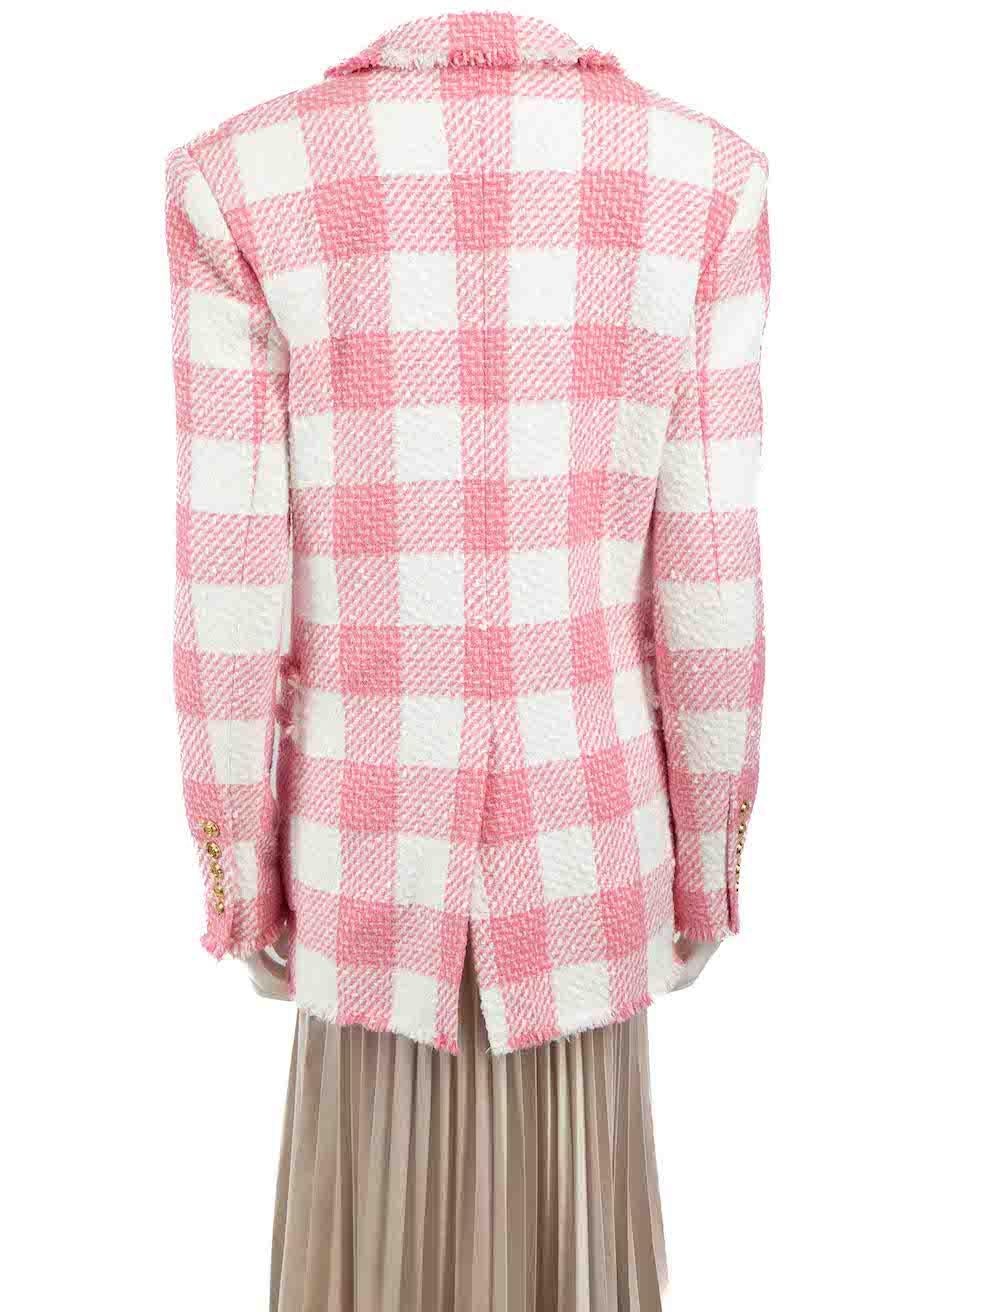 Balmain Pink Tweed Check Double Breast Blazer Size XS In Good Condition For Sale In London, GB